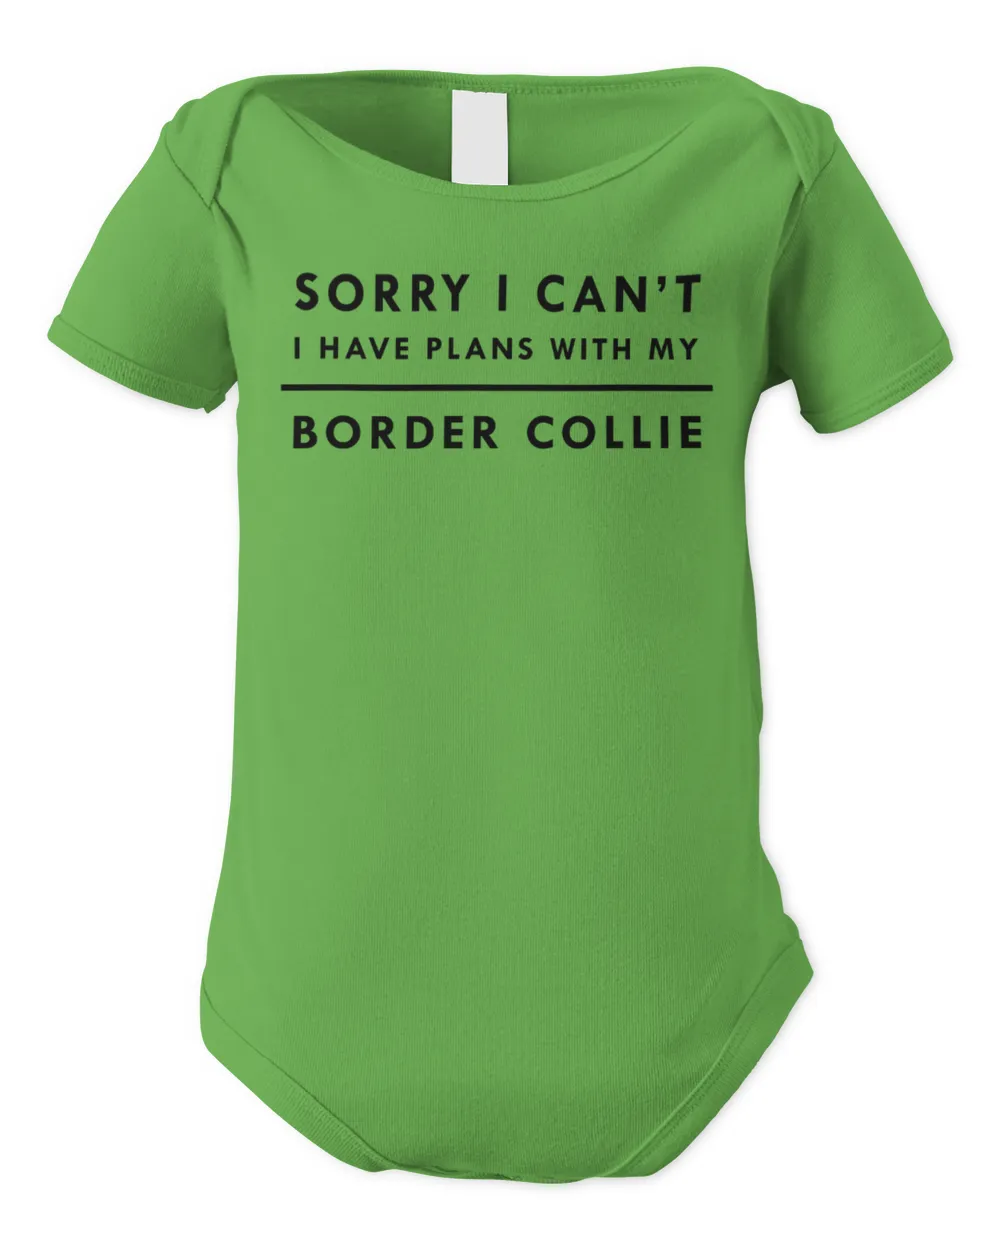 I Have Plans With My Border Collie